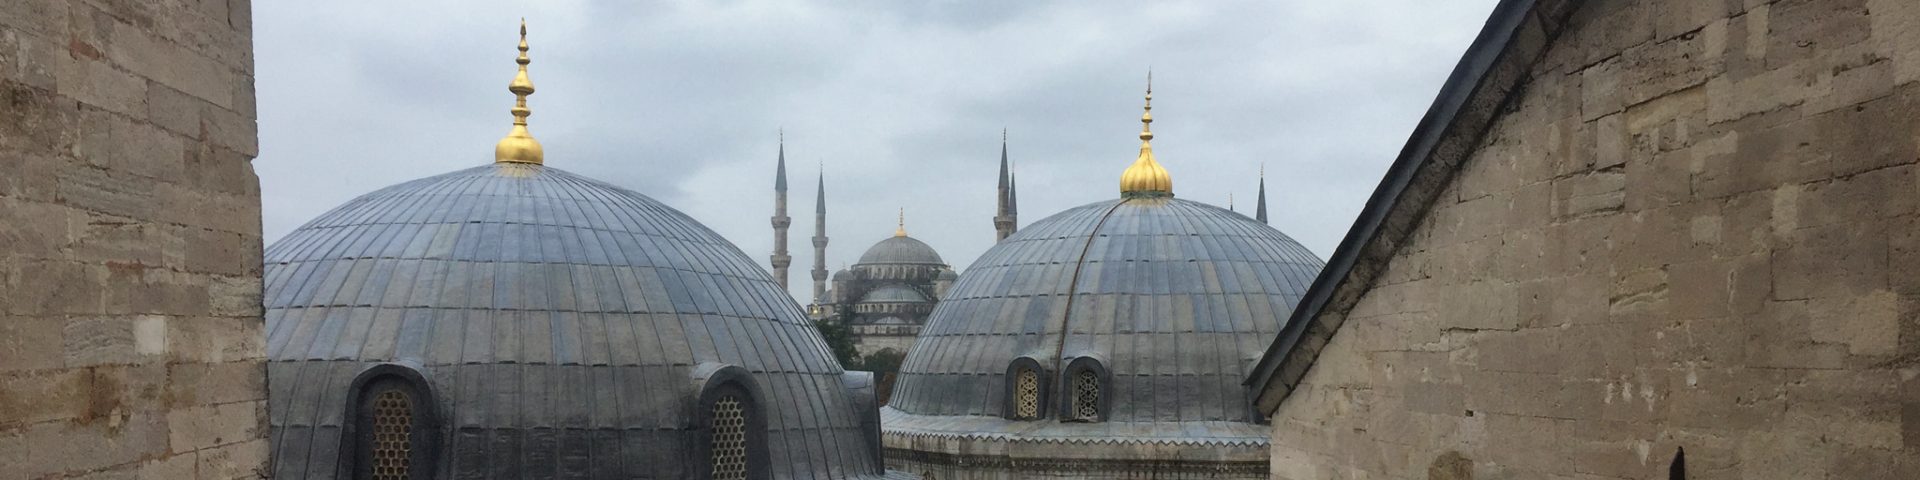 Over Coffee Istanbul w/Carol Sebert of Creative Matters. | Image courtesy of The Ruggist.